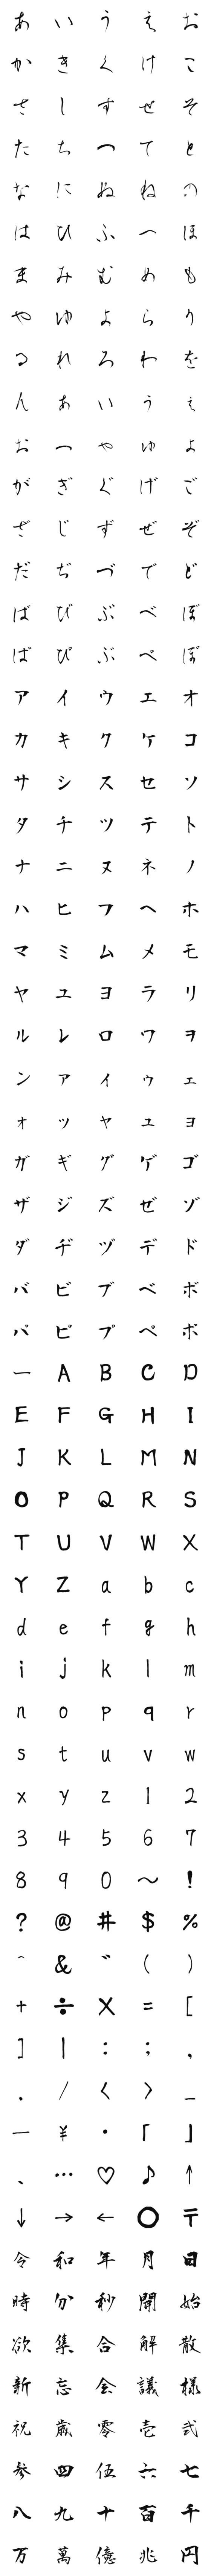 [LINE絵文字]毛筆フォント（基本）の画像一覧